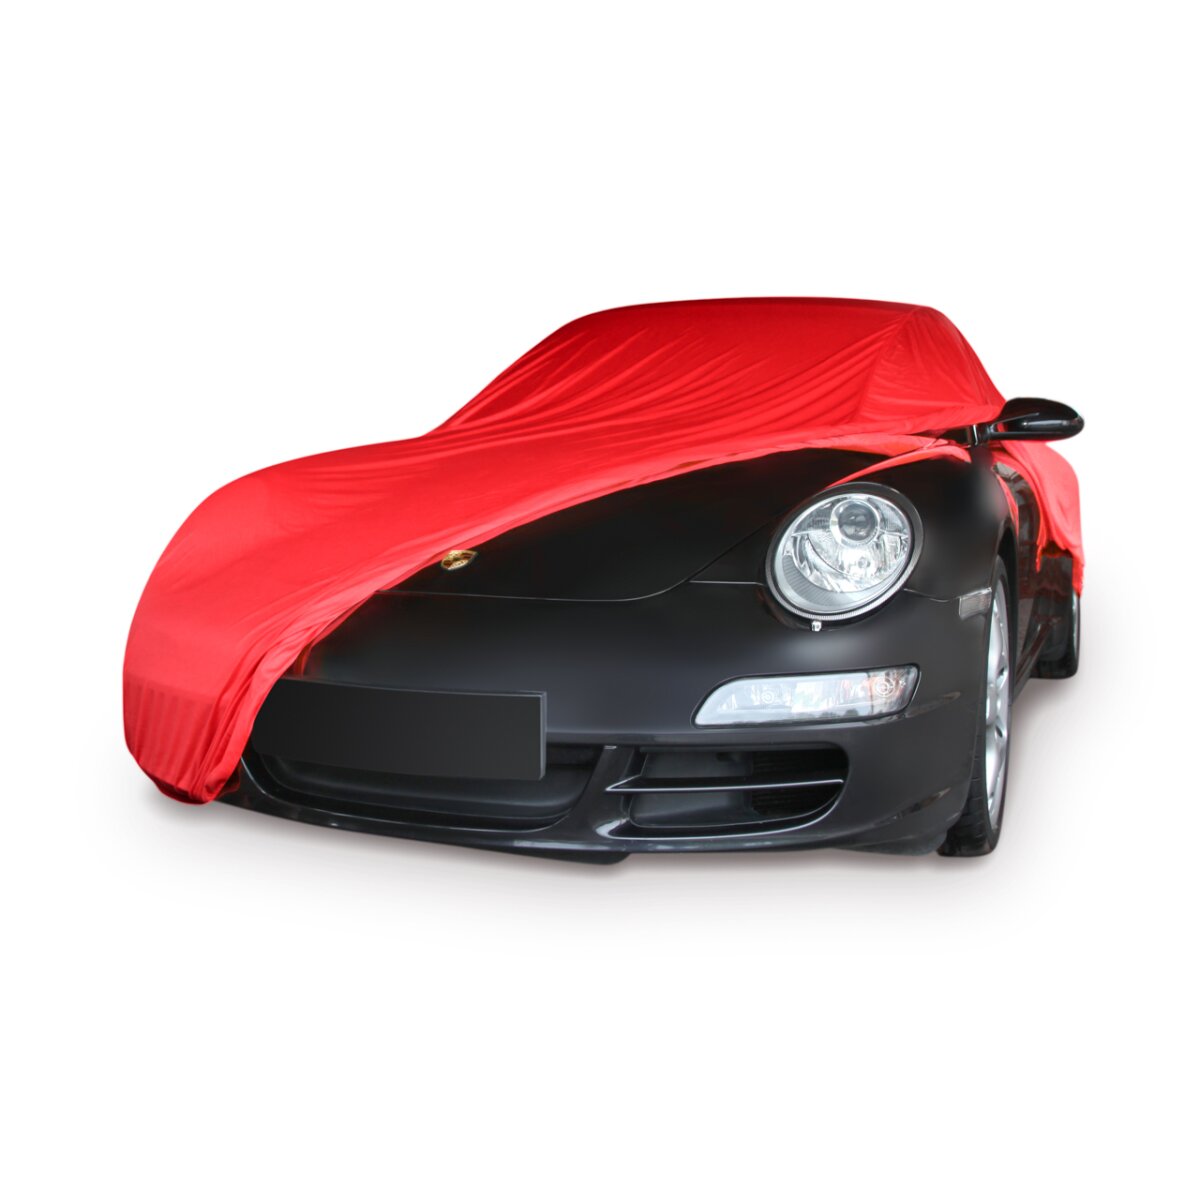 https://www.autoabdeckung.com/media/image/product/10050/lg/autoabdeckung-soft-indoor-car-cover-fuer-bmw-z4-roadster-g29.jpg